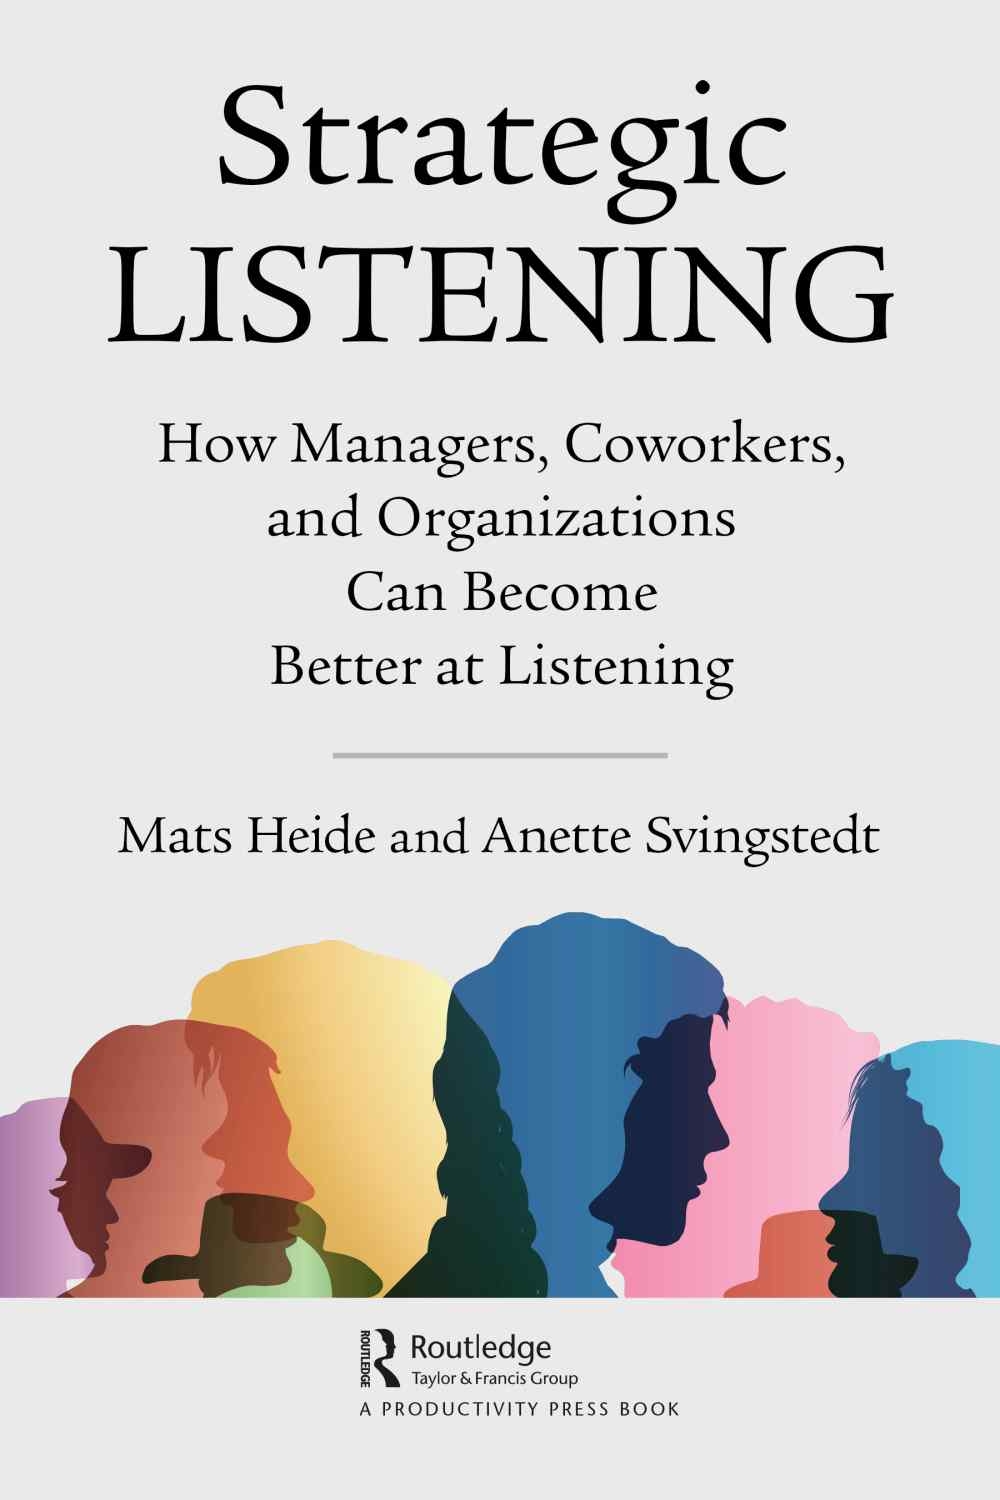 Strategic Listening: How Managers, Employees, and Organizations Can Become Better at Listening